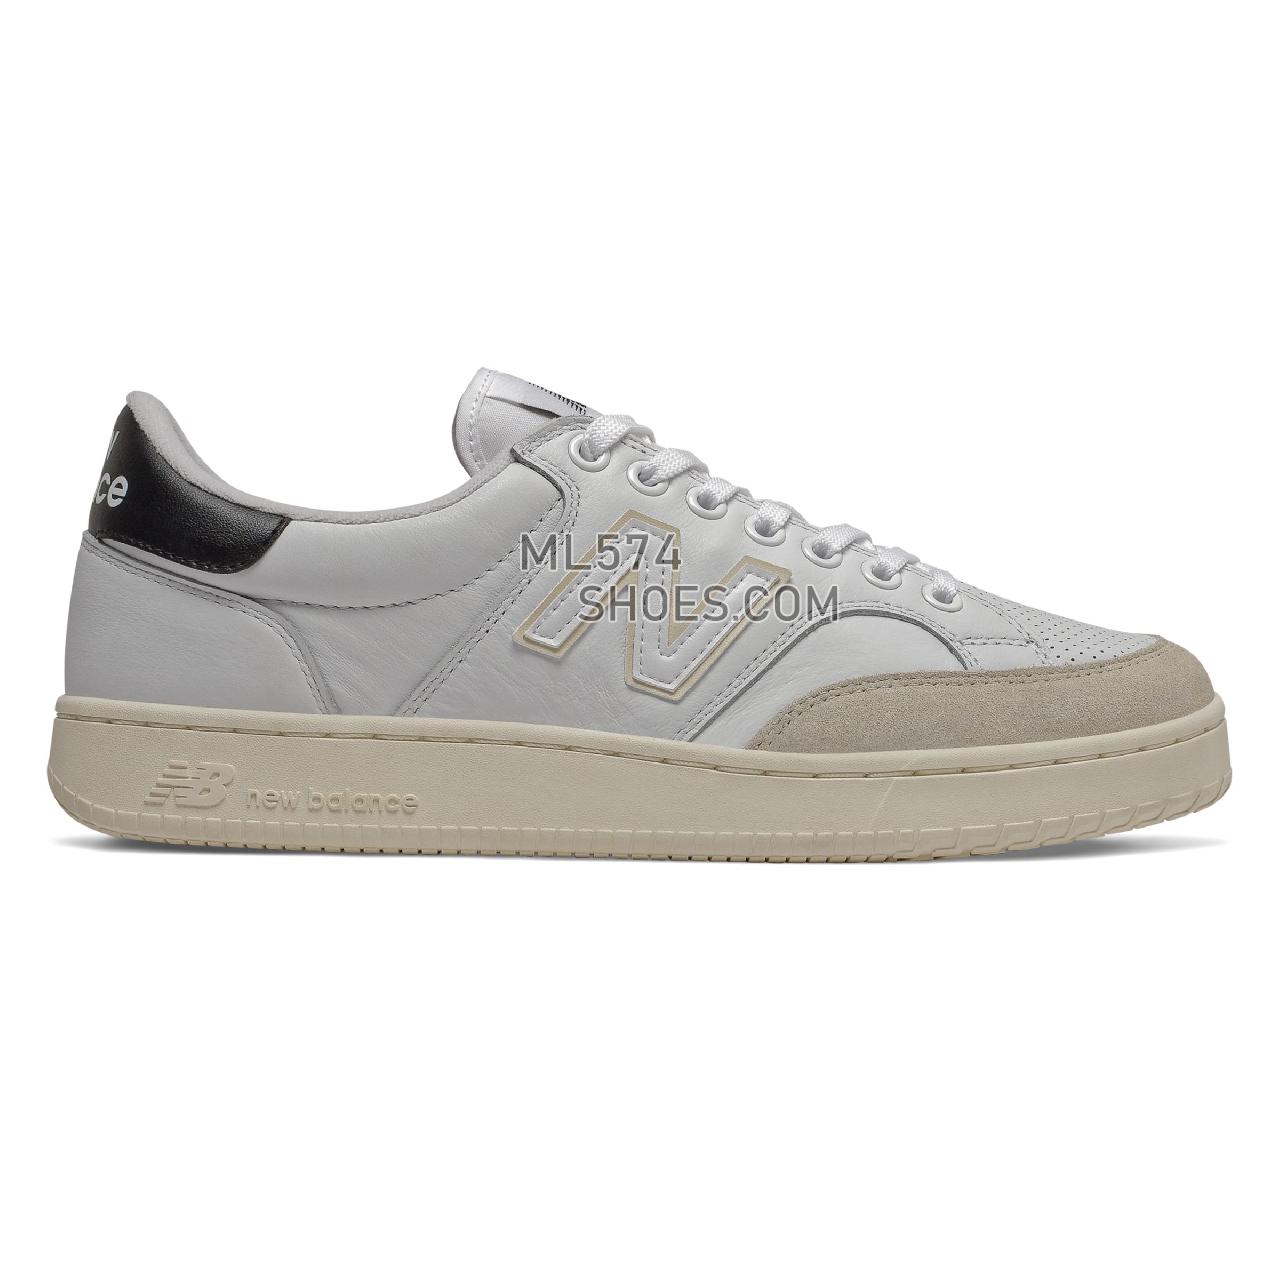 New Balance Pro Court Cup - Men's Pro Court Cup Classic - Munsell White with Black - PROCTCBA